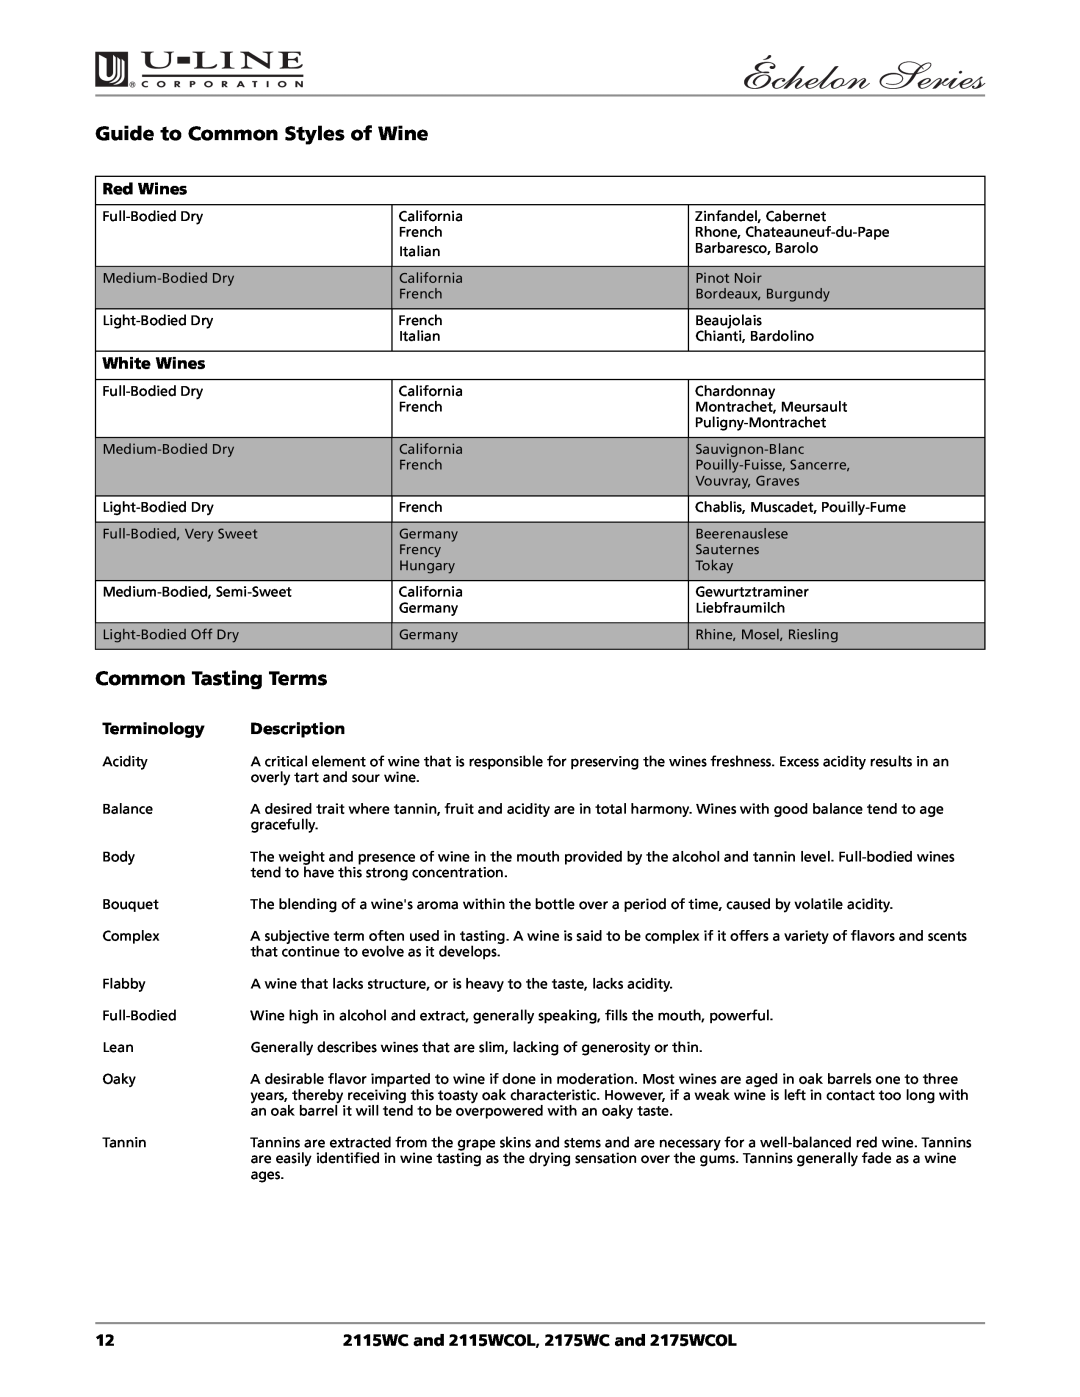 U-Line 2115WC manual Guide to Common Styles of Wine, Common Tasting Terms, Red Wines, White Wines, Terminology, Description 